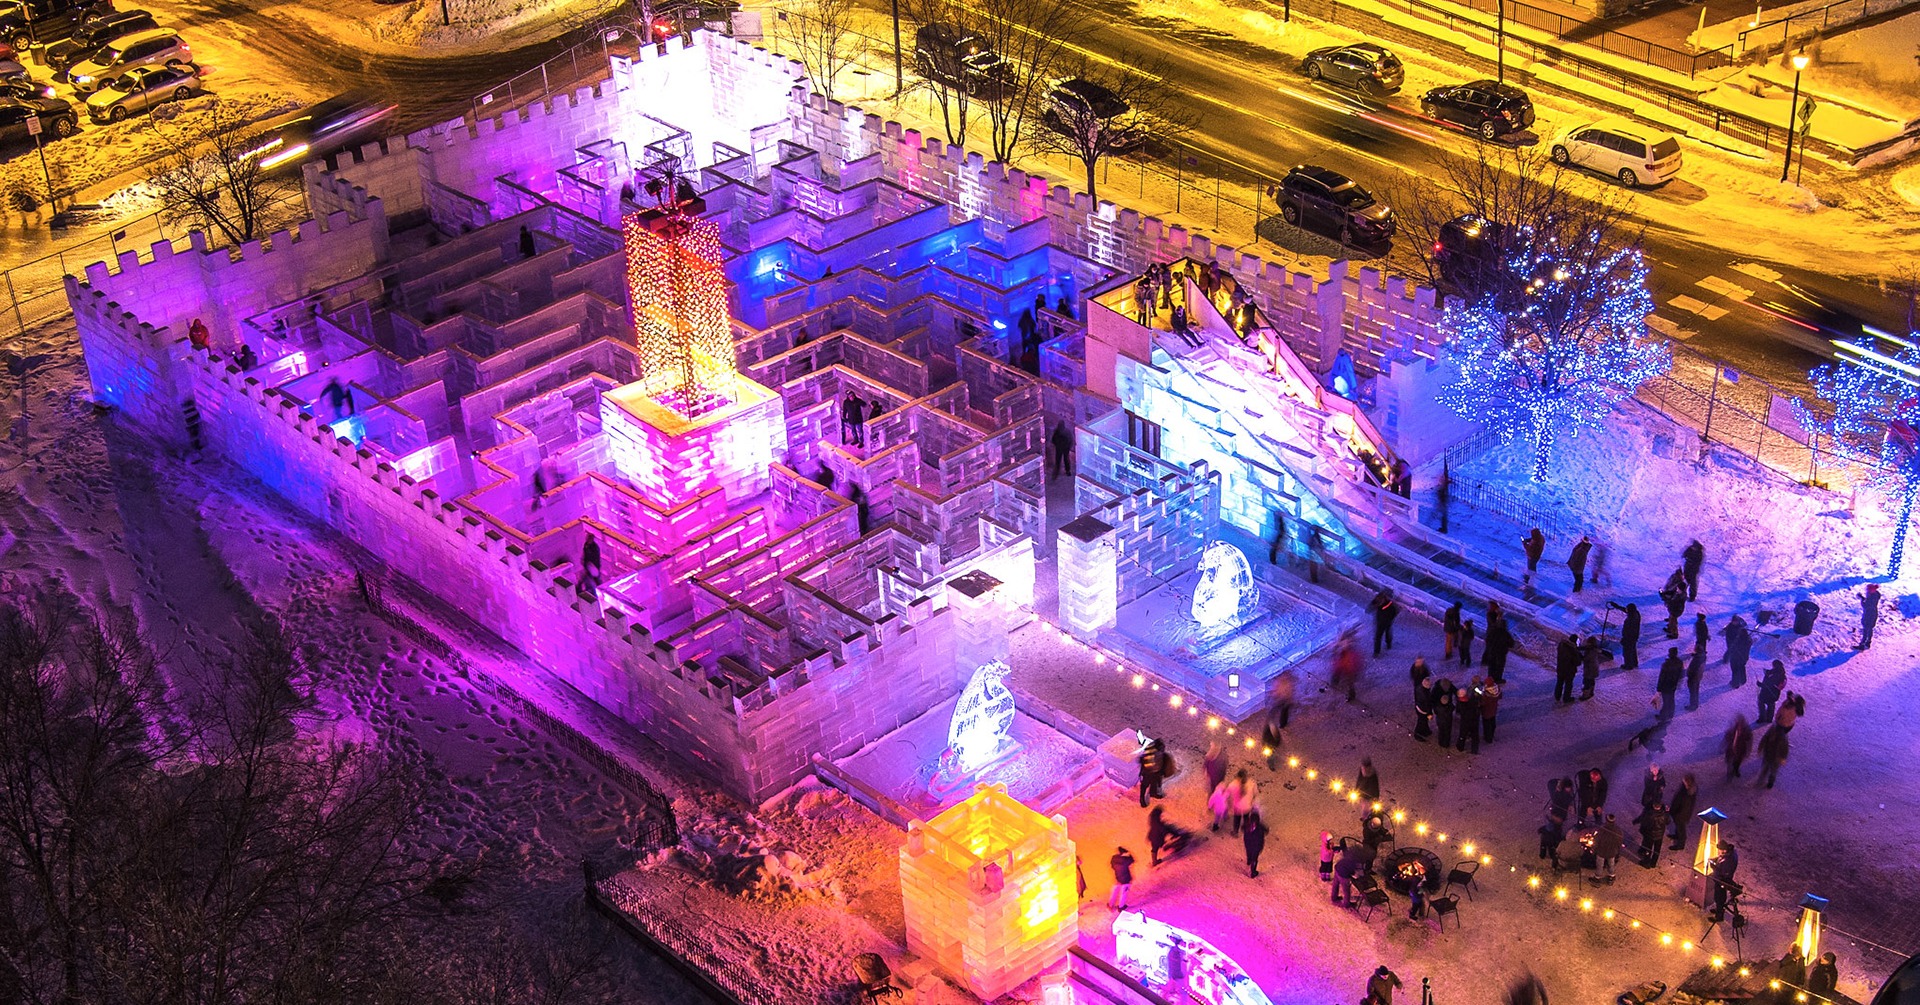 Ski Jumping, YG at the Armory, and an Epic Ice Maze This Week's Best